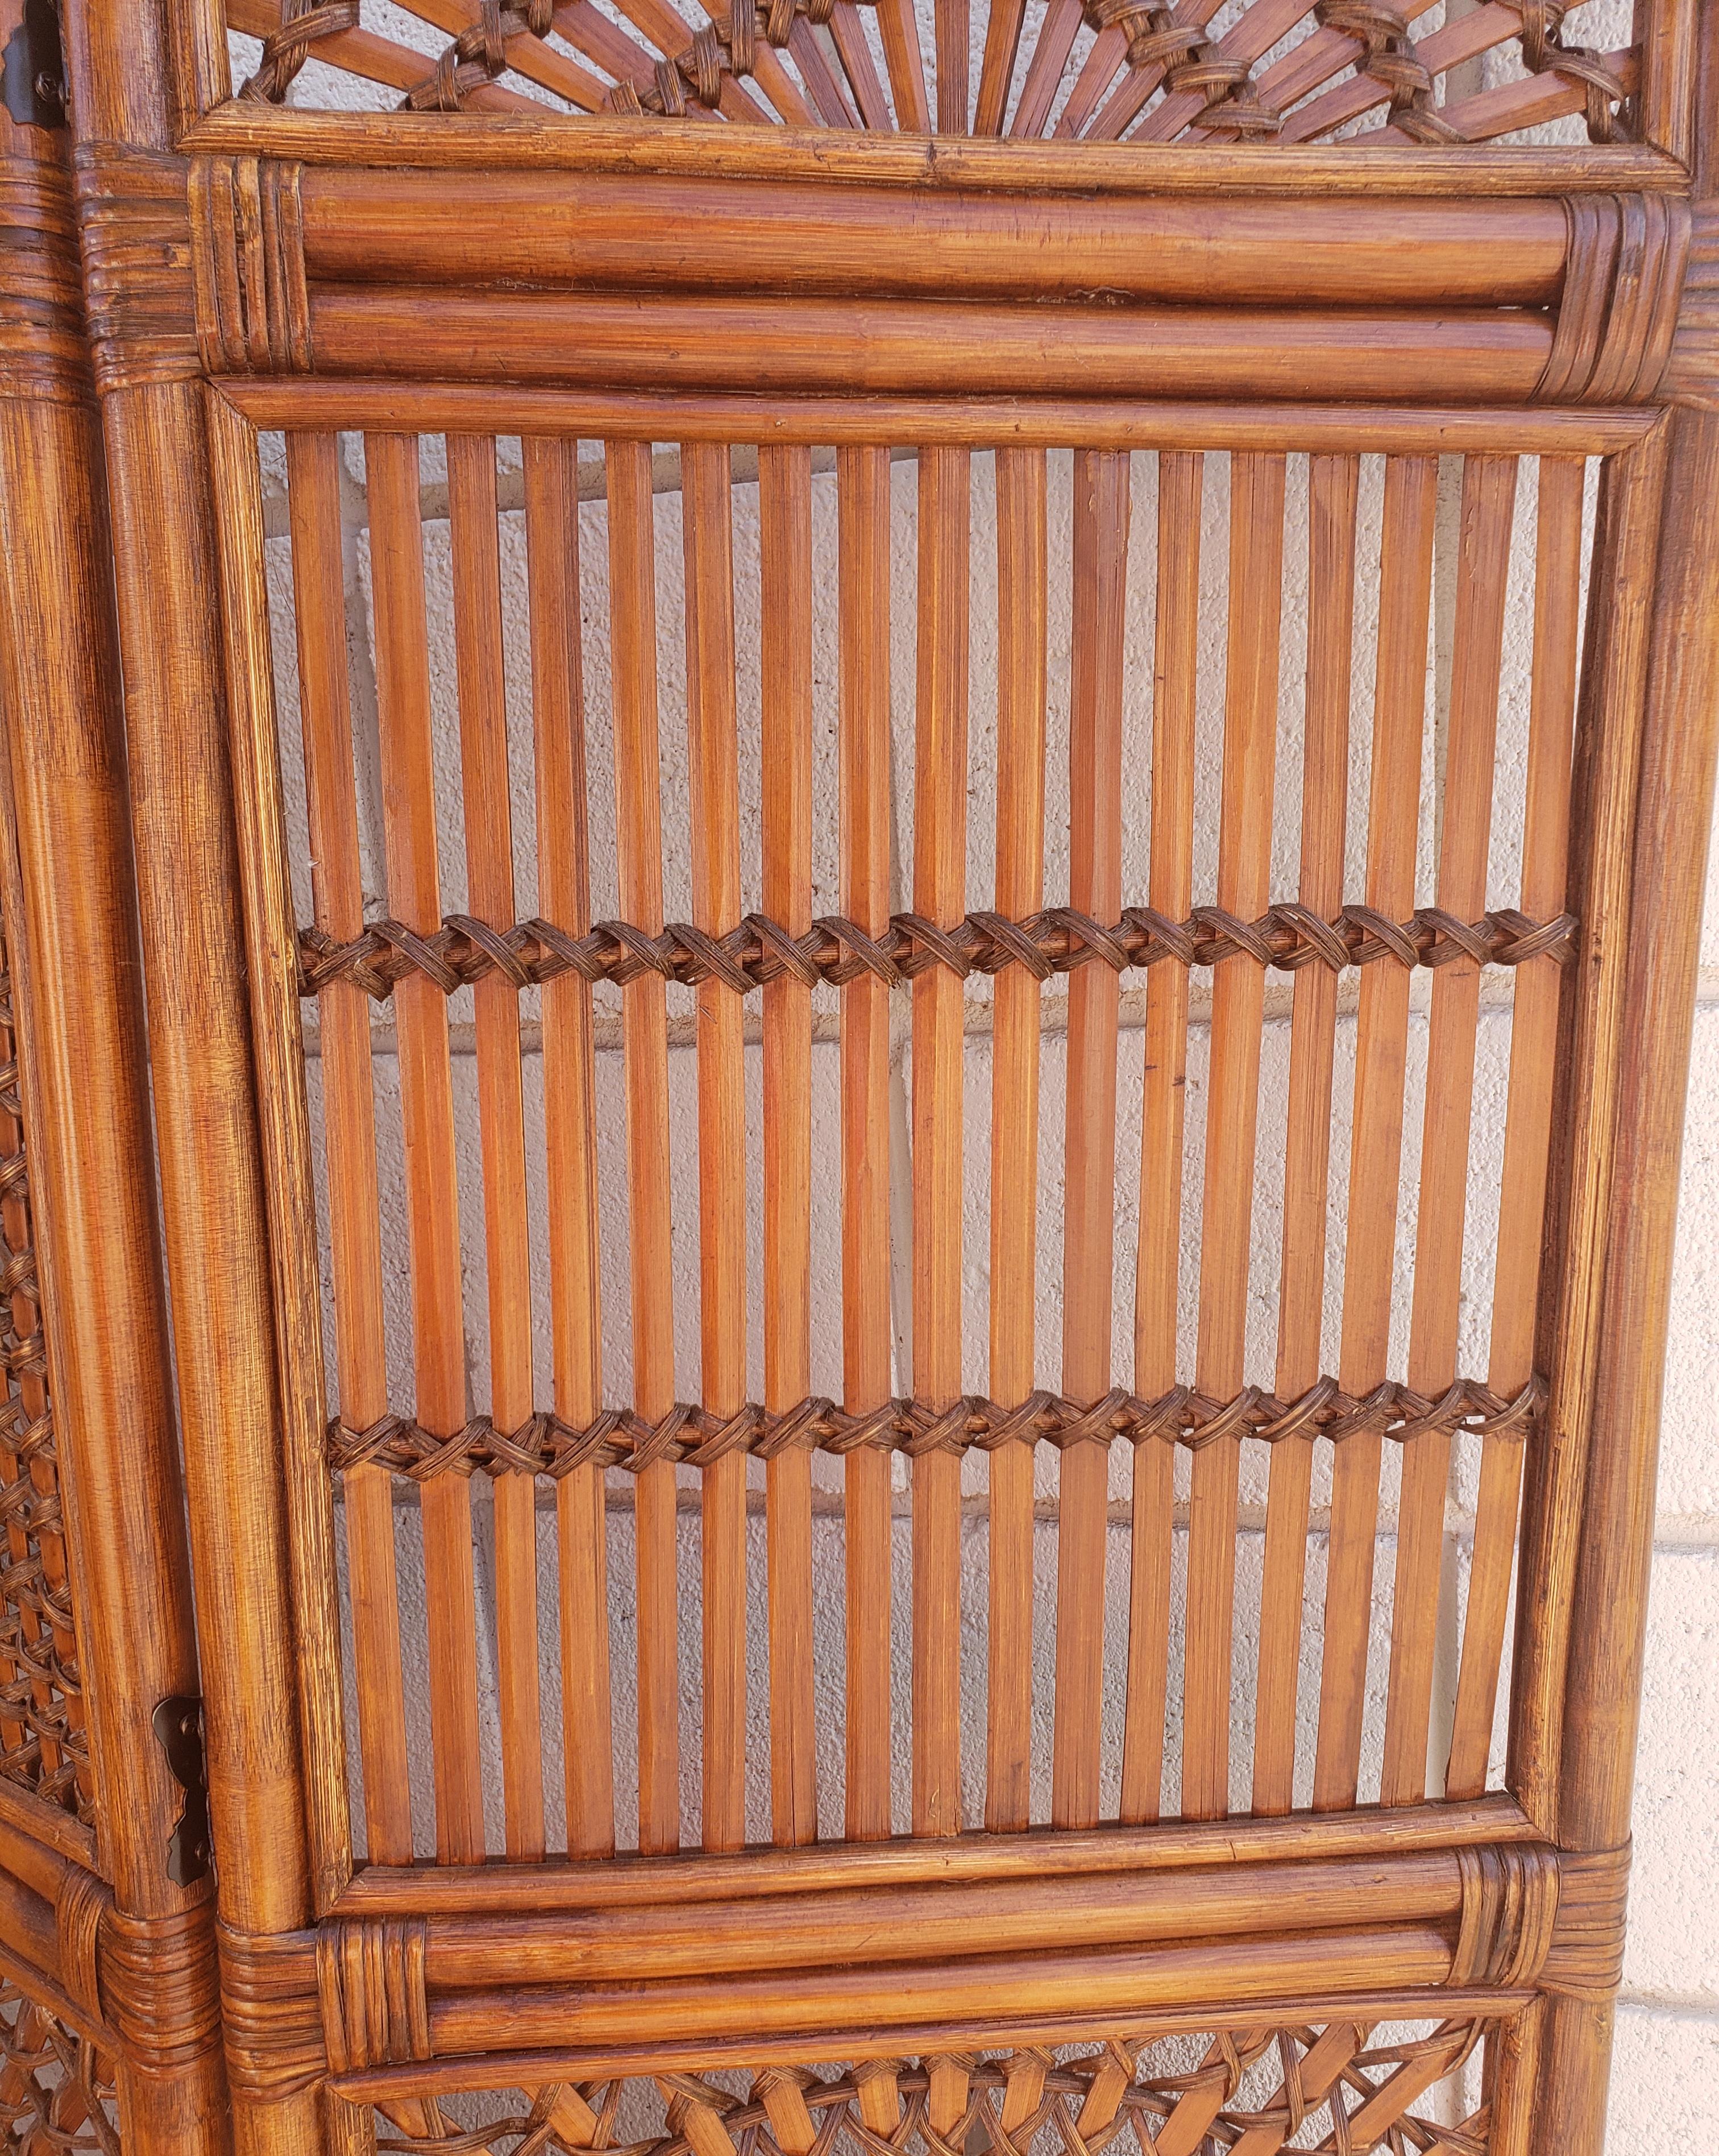 Mid-Century Modern tall three wall-panel solid bamboo wood room divider, screen or partition in brown finish.
A stunning vintage piece that would look fantastic in any living space to give the classiest separation needed. 
Great for the mid